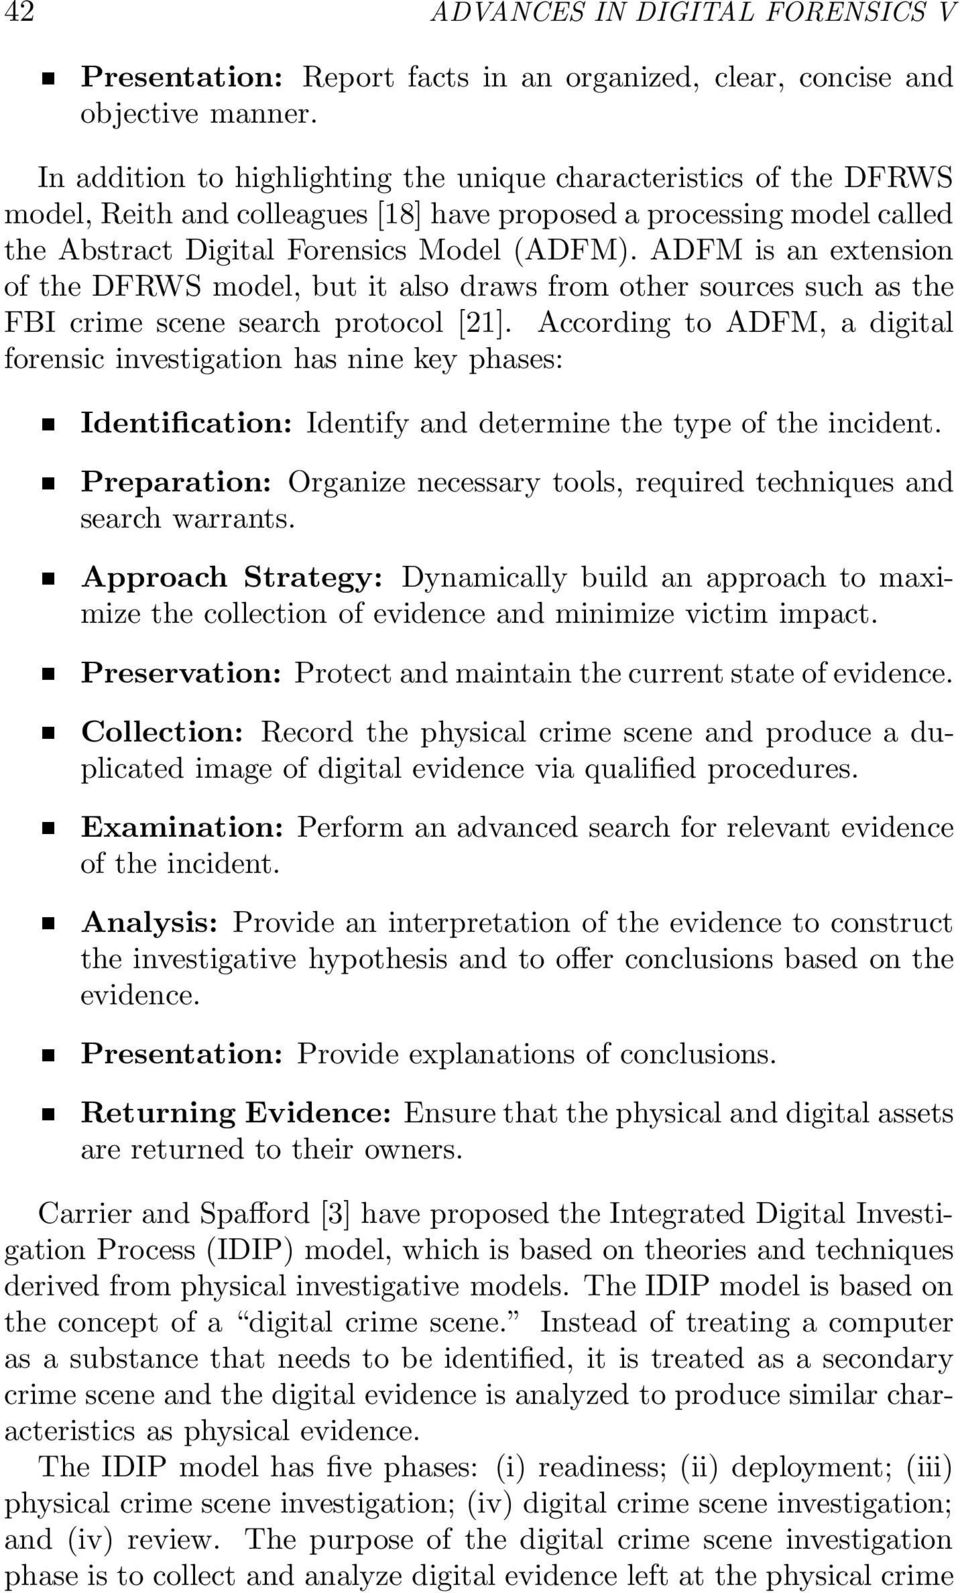 ADFM is an extension of the DFRWS model, but it also draws from other sources such as the FBI crime scene search protocol [21].